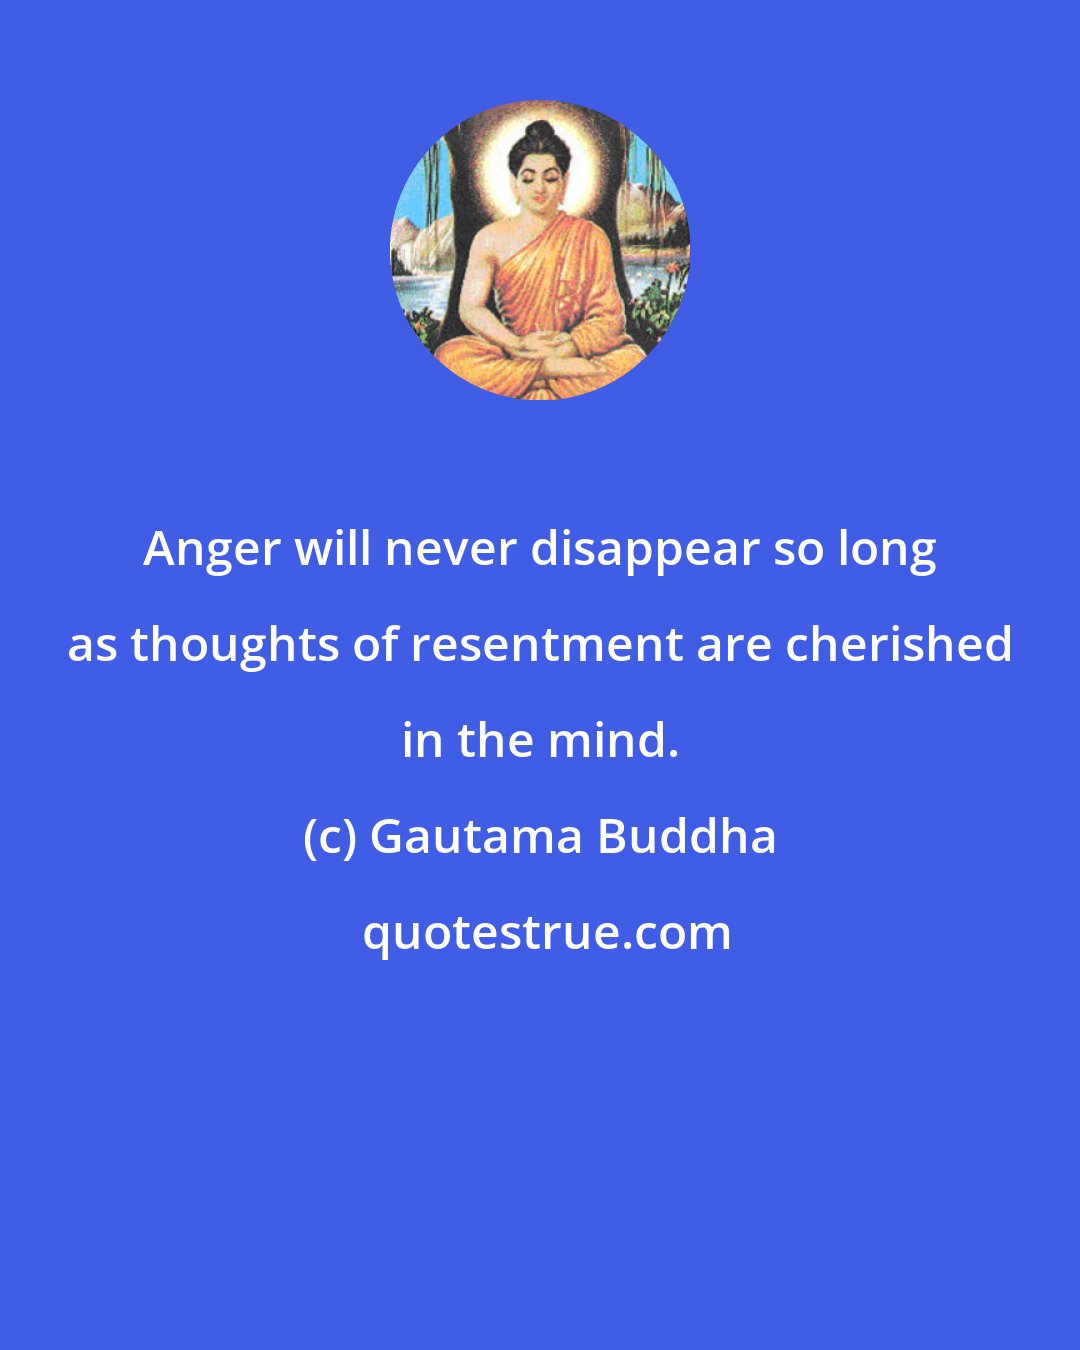 Gautama Buddha: Anger will never disappear so long as thoughts of resentment are cherished in the mind.